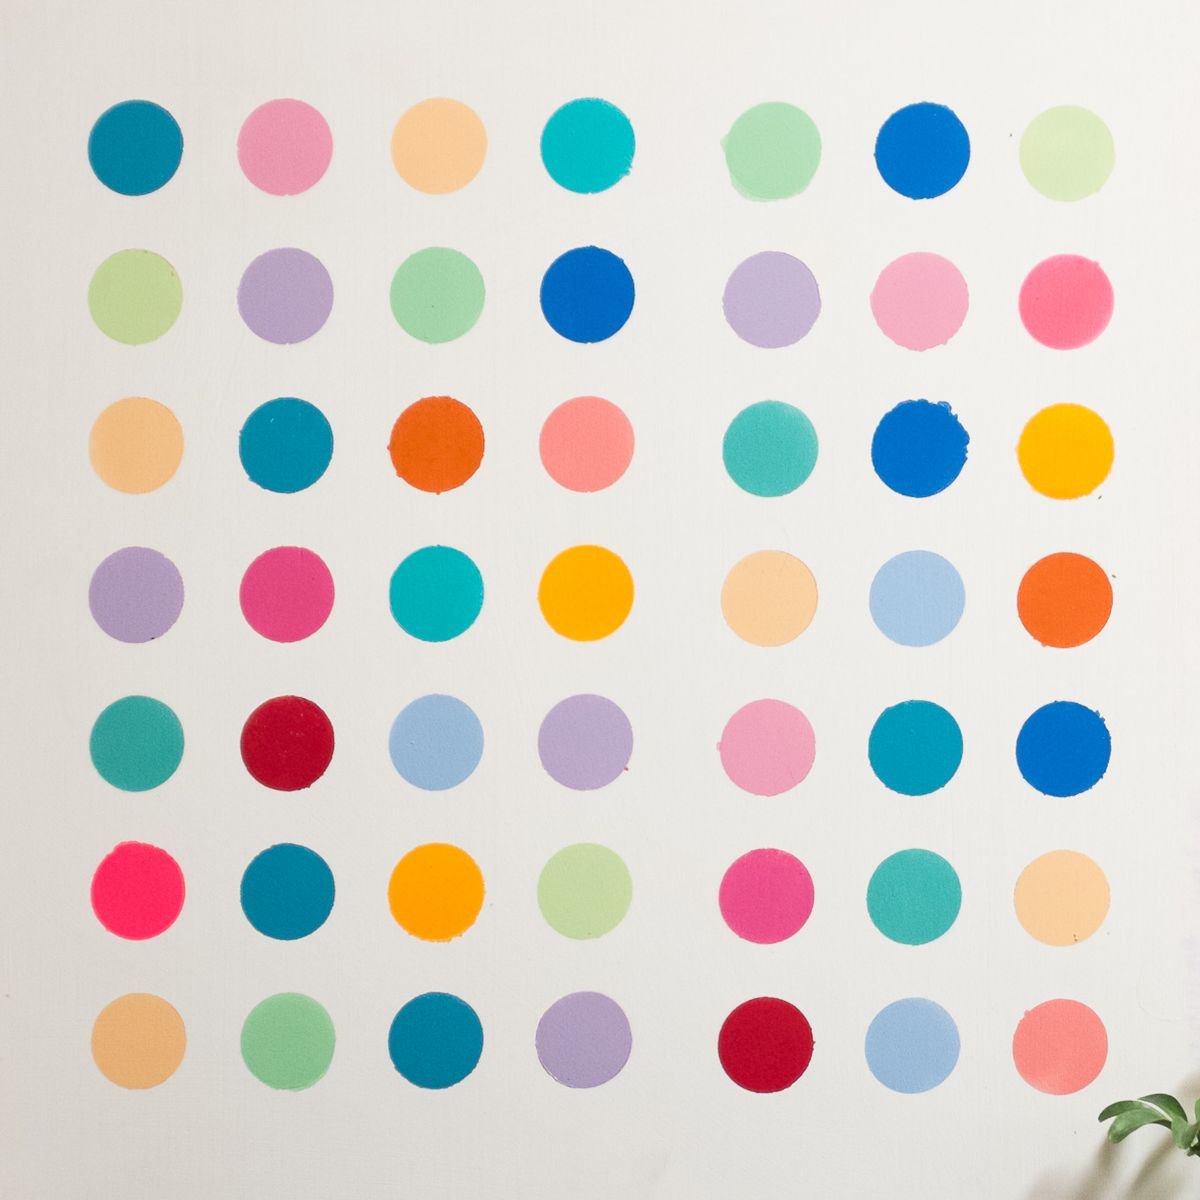 Dots Imperfection II by Dane Shue